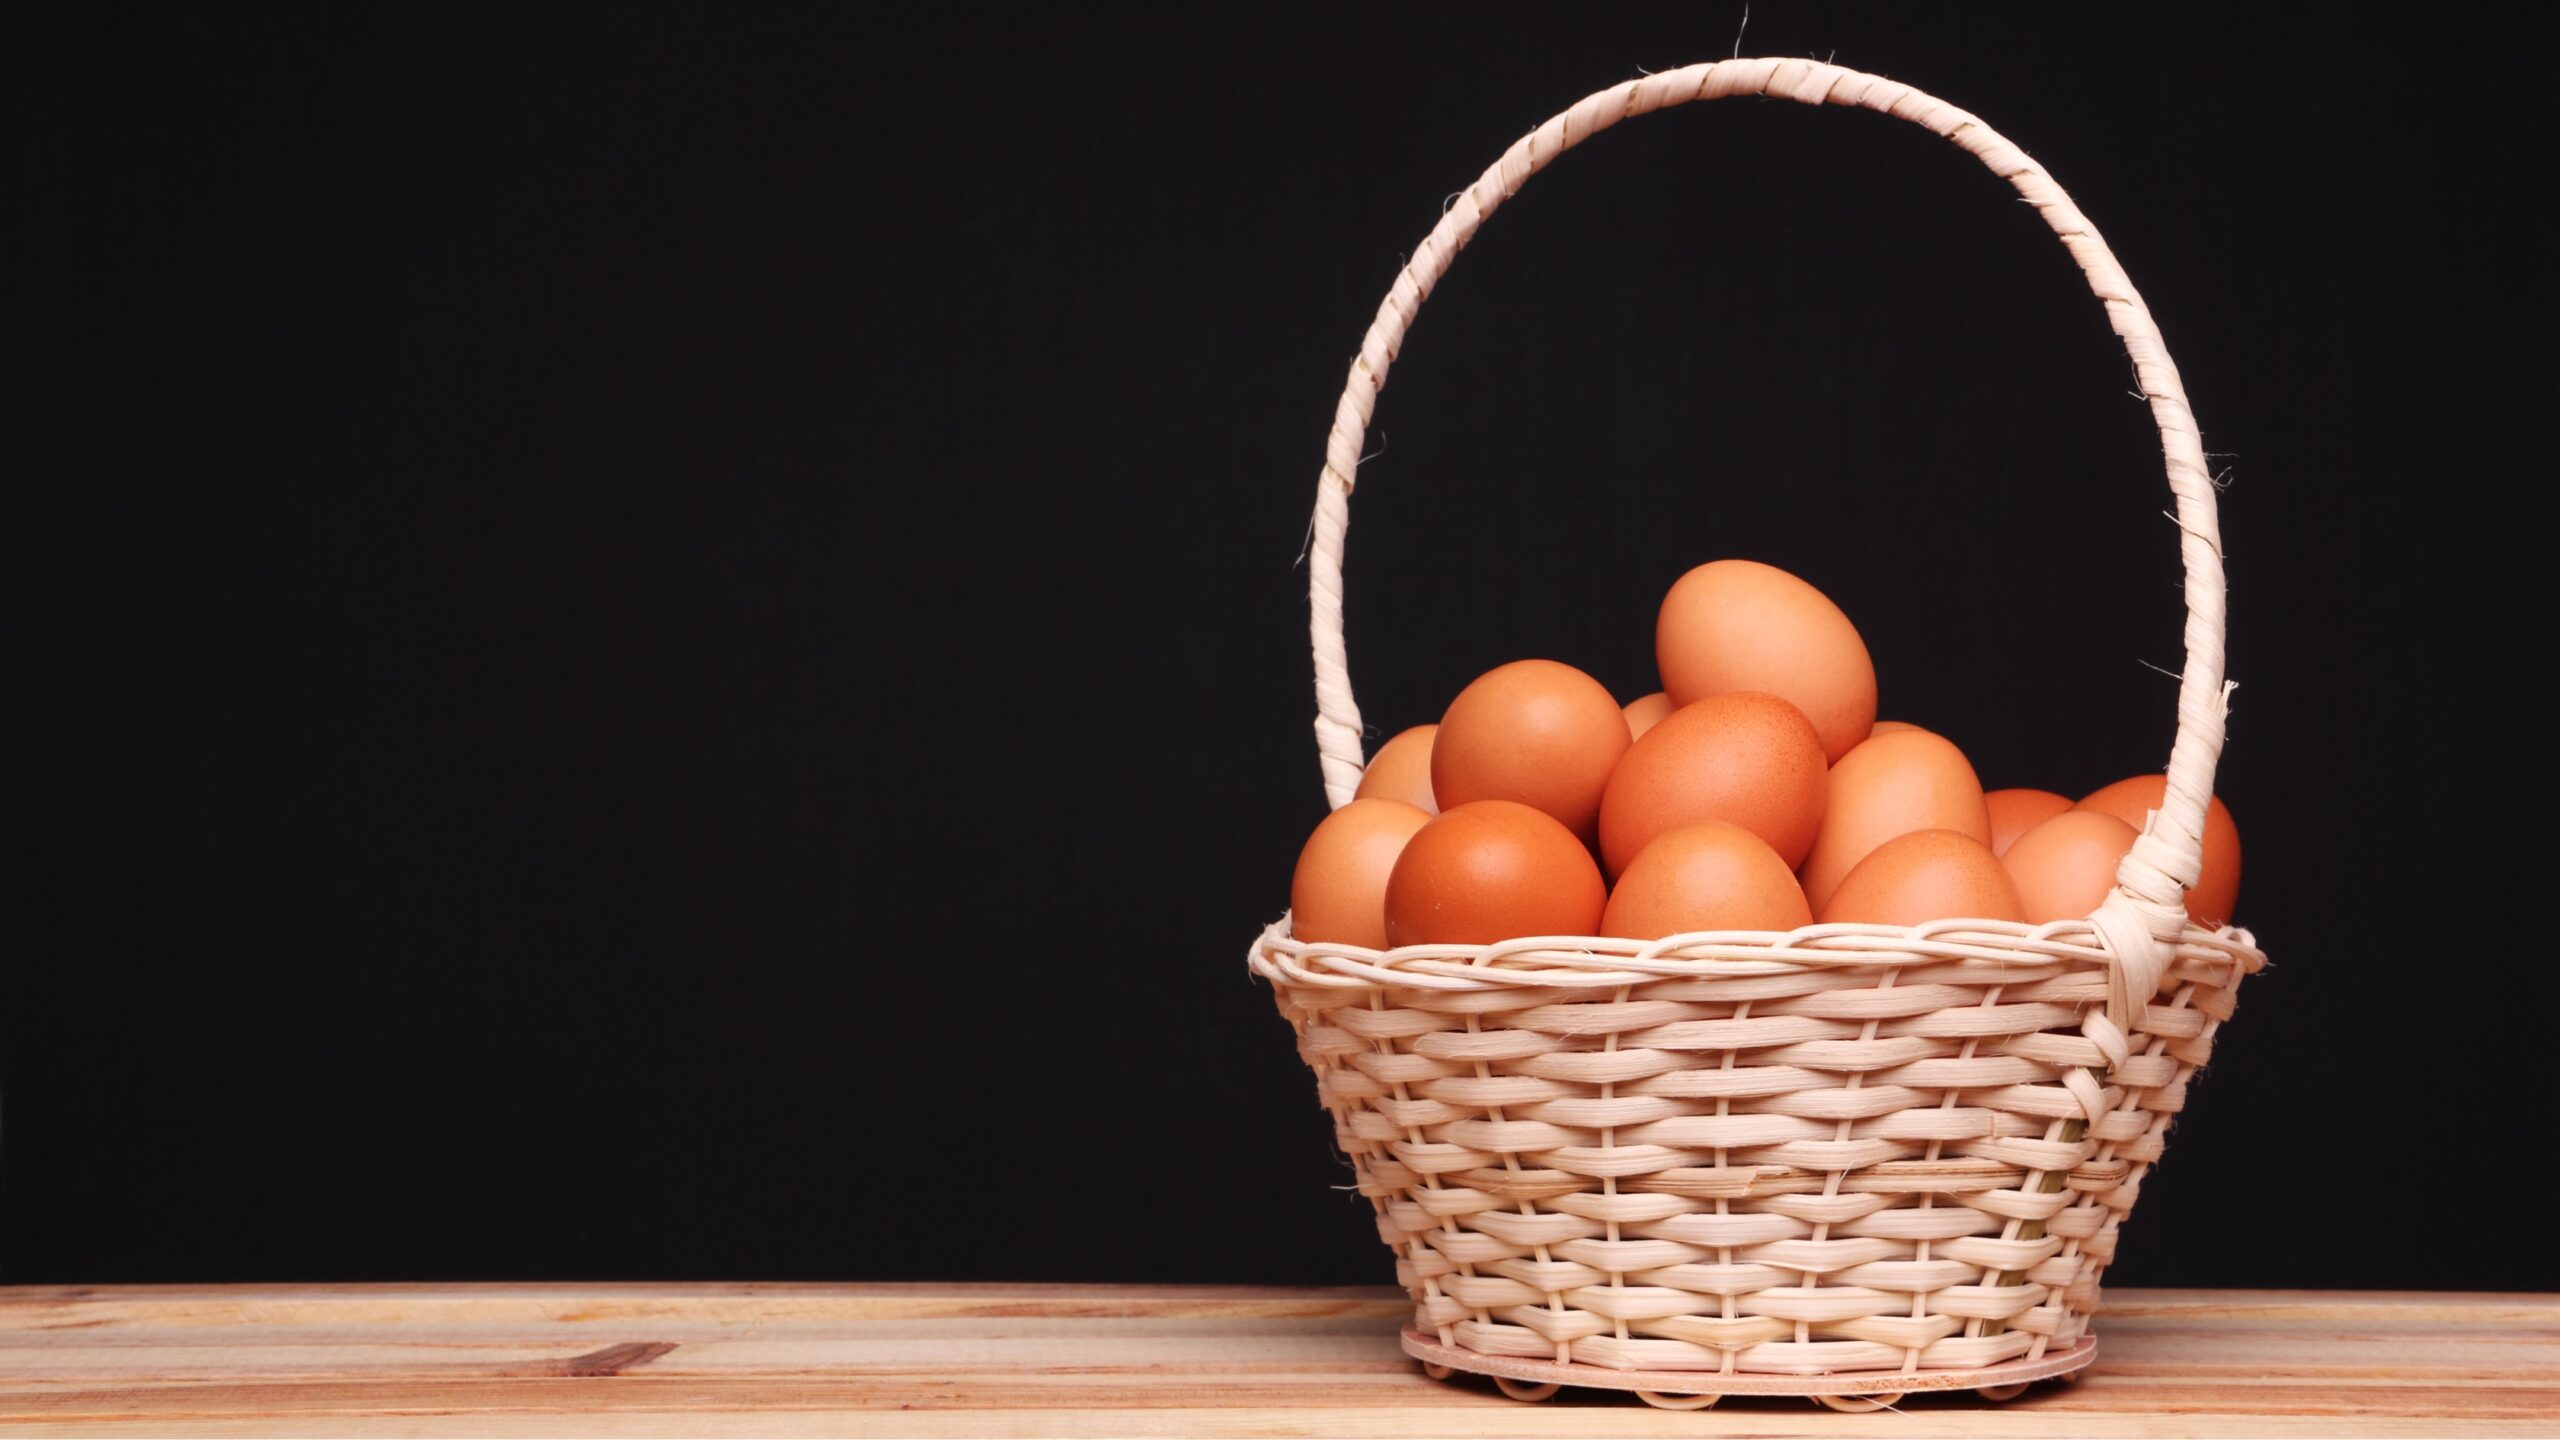 Black background with a basket, containing eggs. on a wooden table